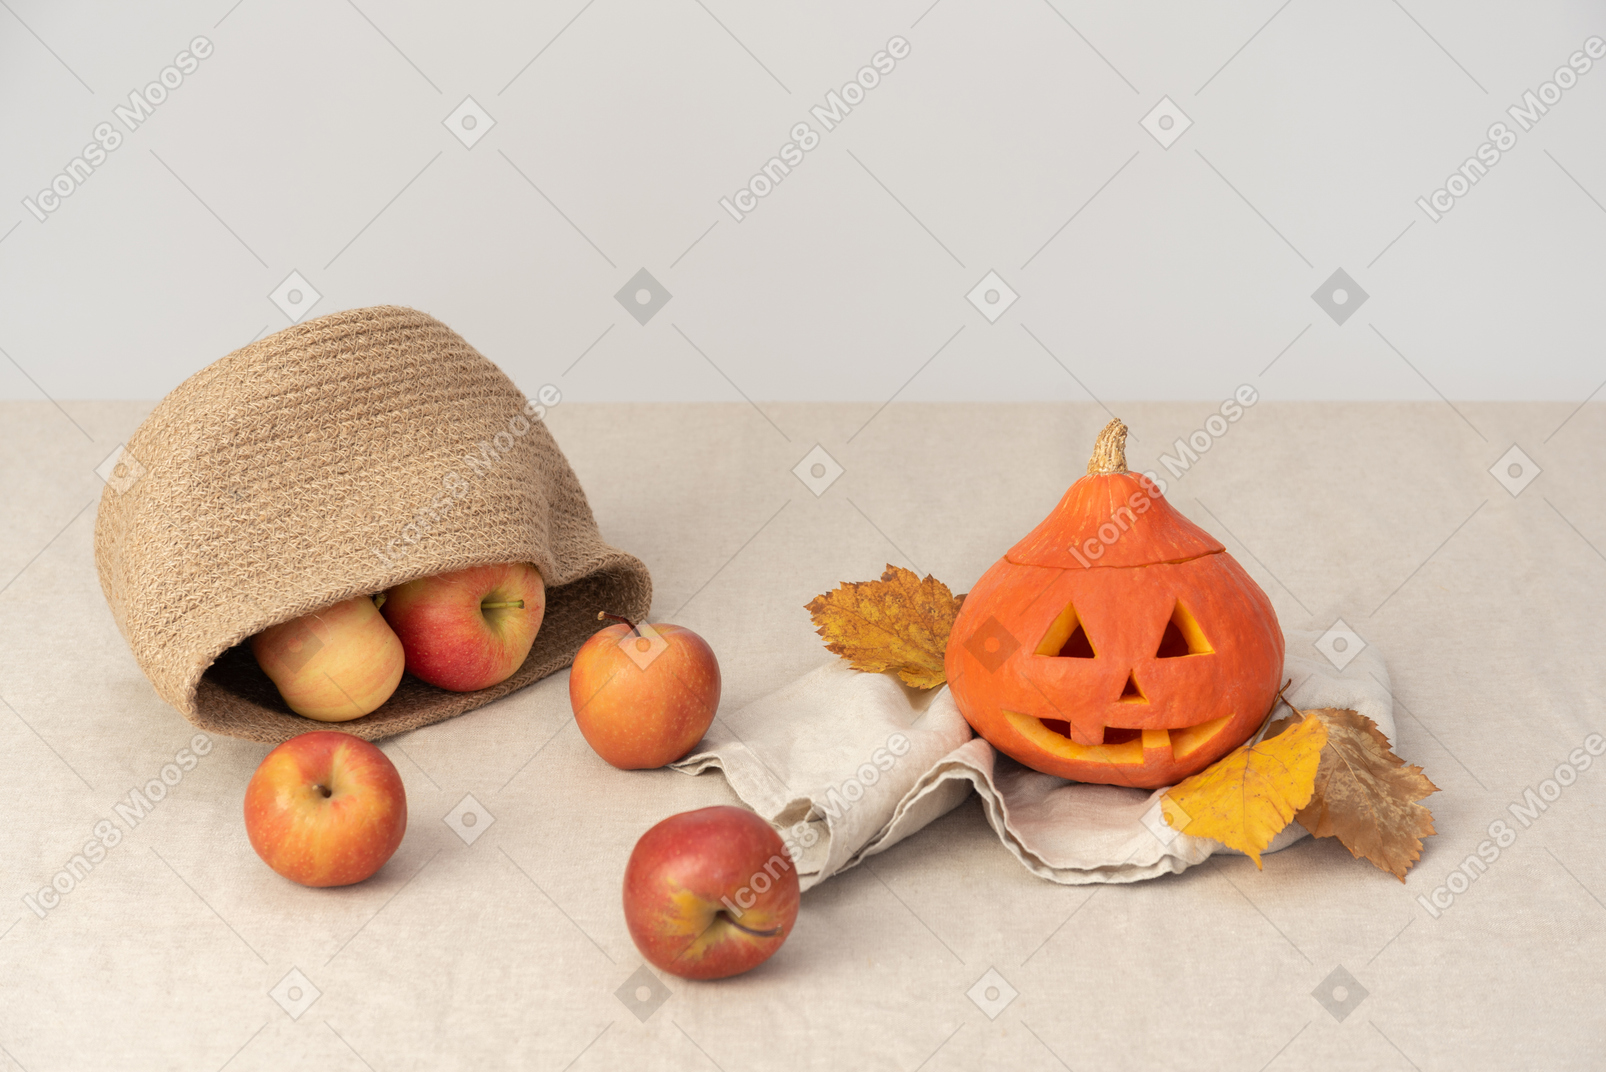 Apples in basket, carved halloween pumpkin and yellow leaves